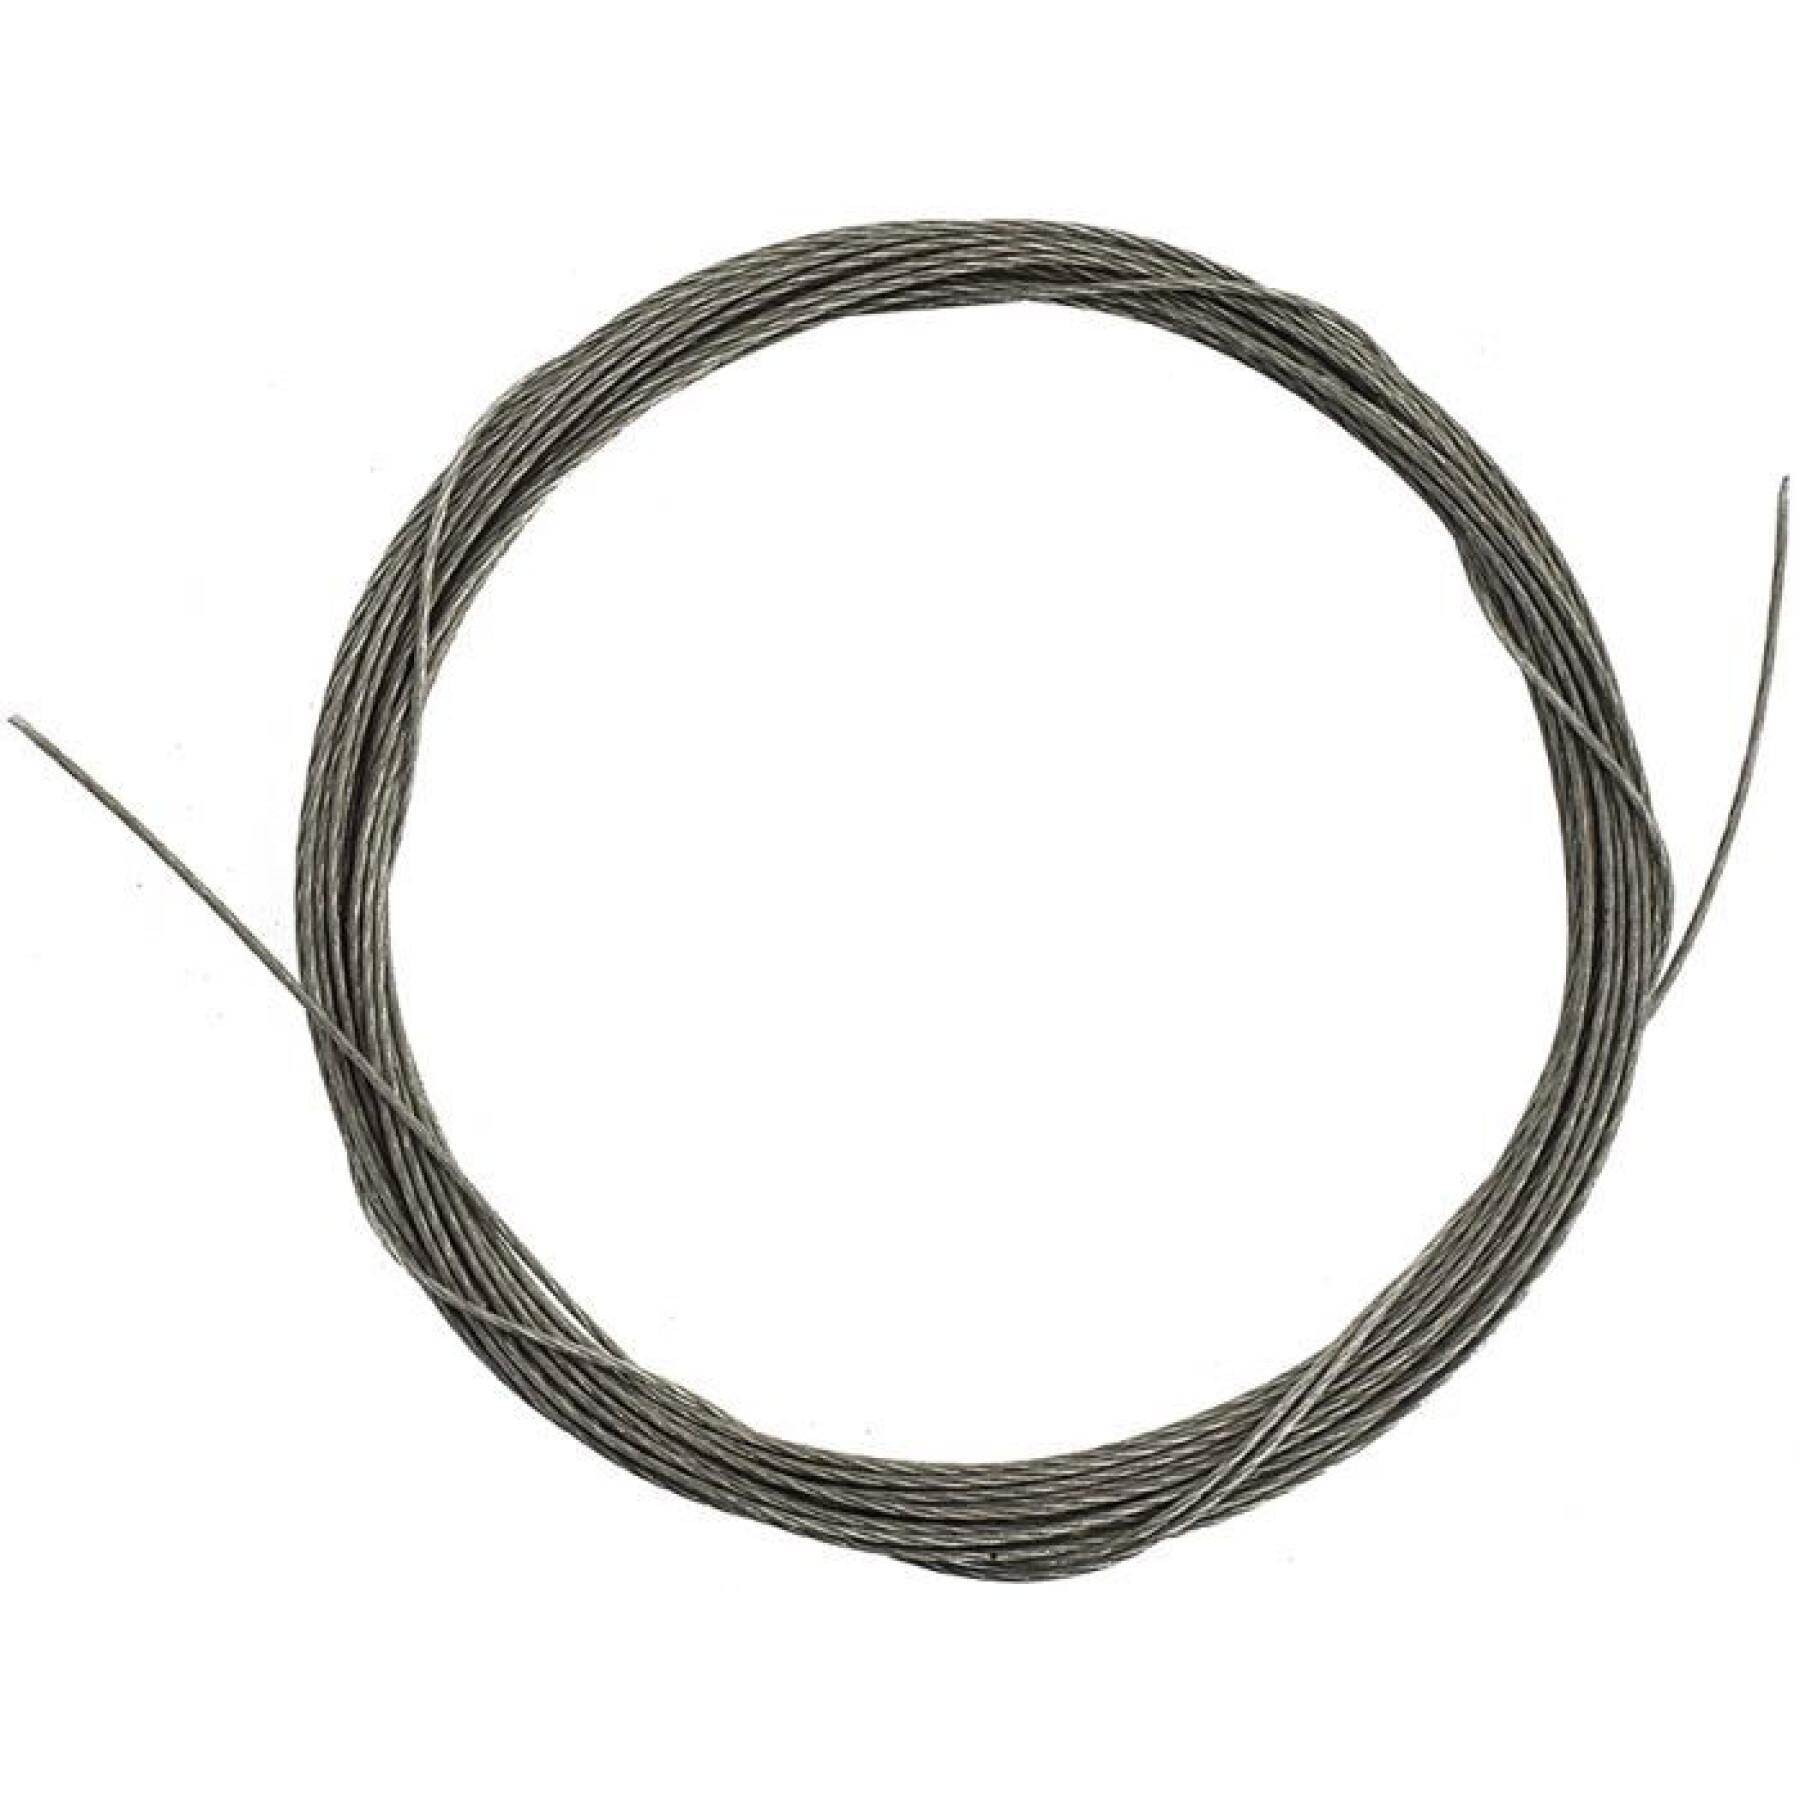 Footer Decoy Wl 70 N Coated Wire 39